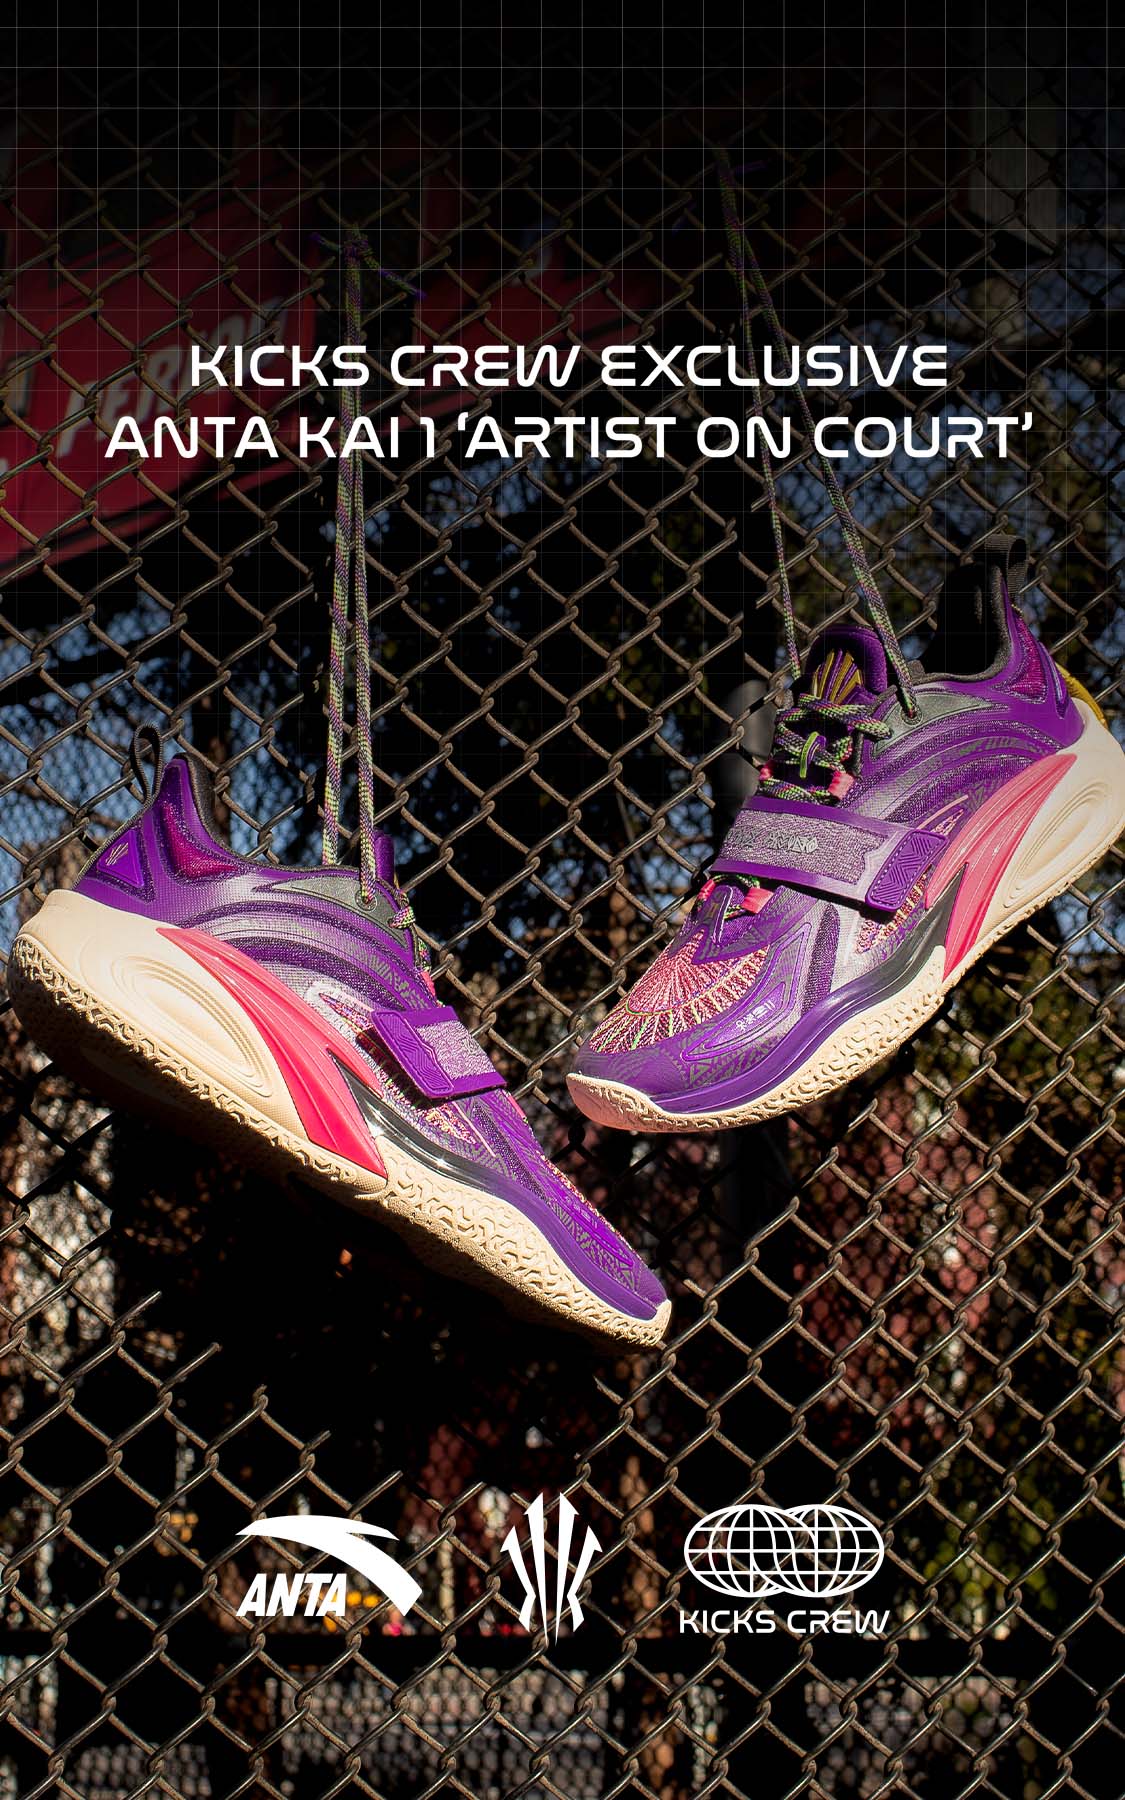 KYRIE low IRVING KAI 1 EXCLUSIVE ACCESS